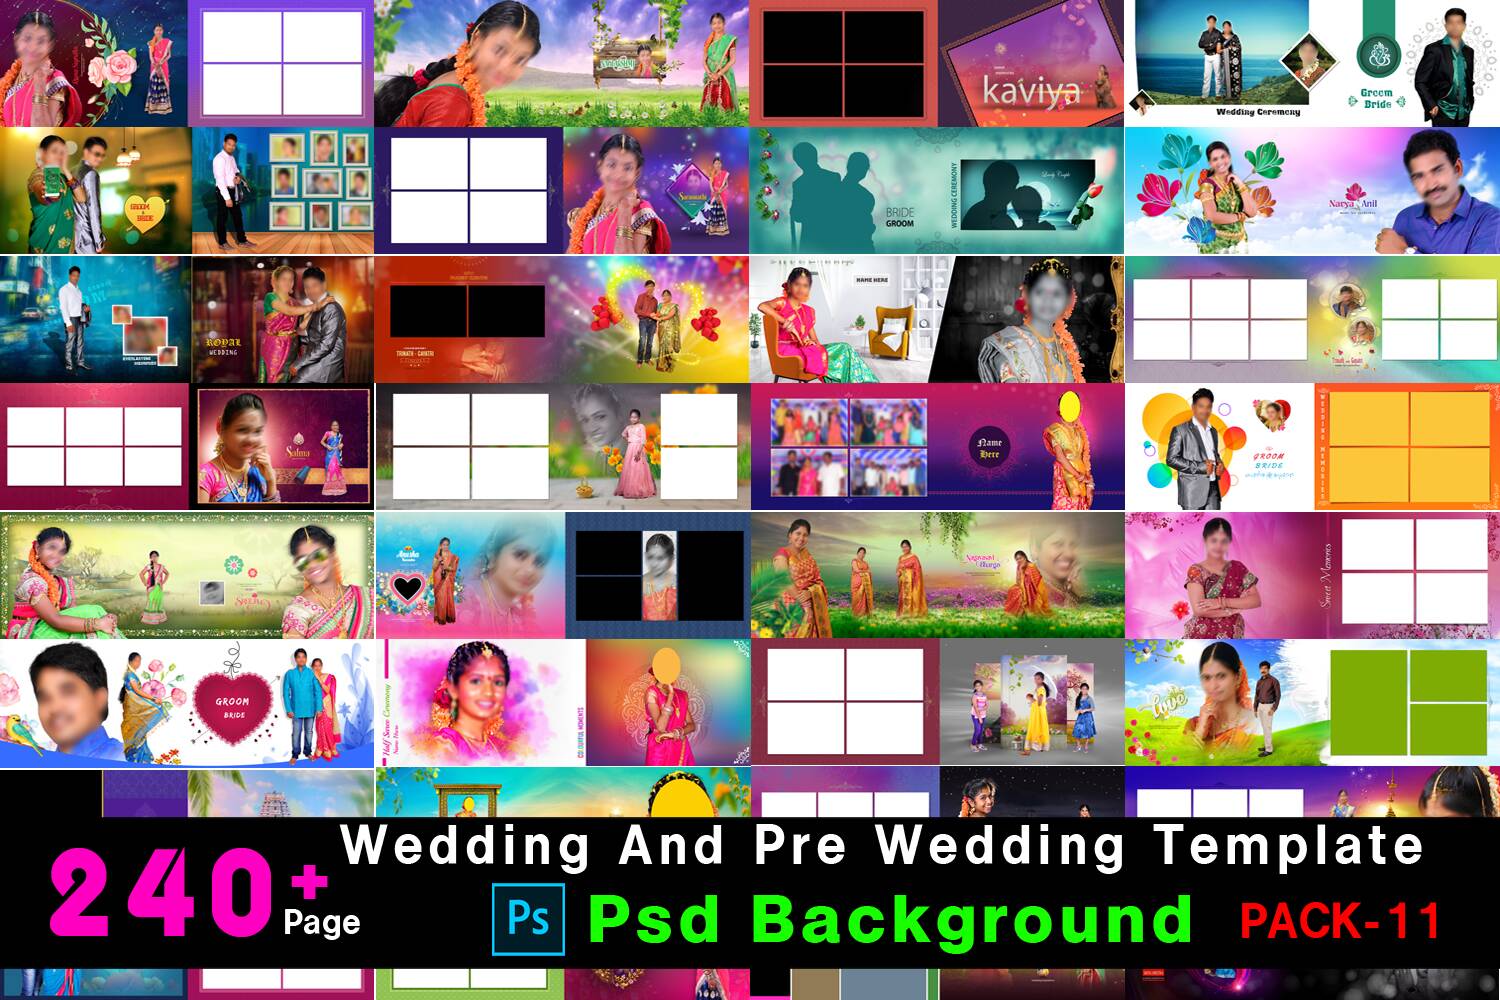 pack-11-wedding-and-pre-wedding-colorful-creative-album-psd-background